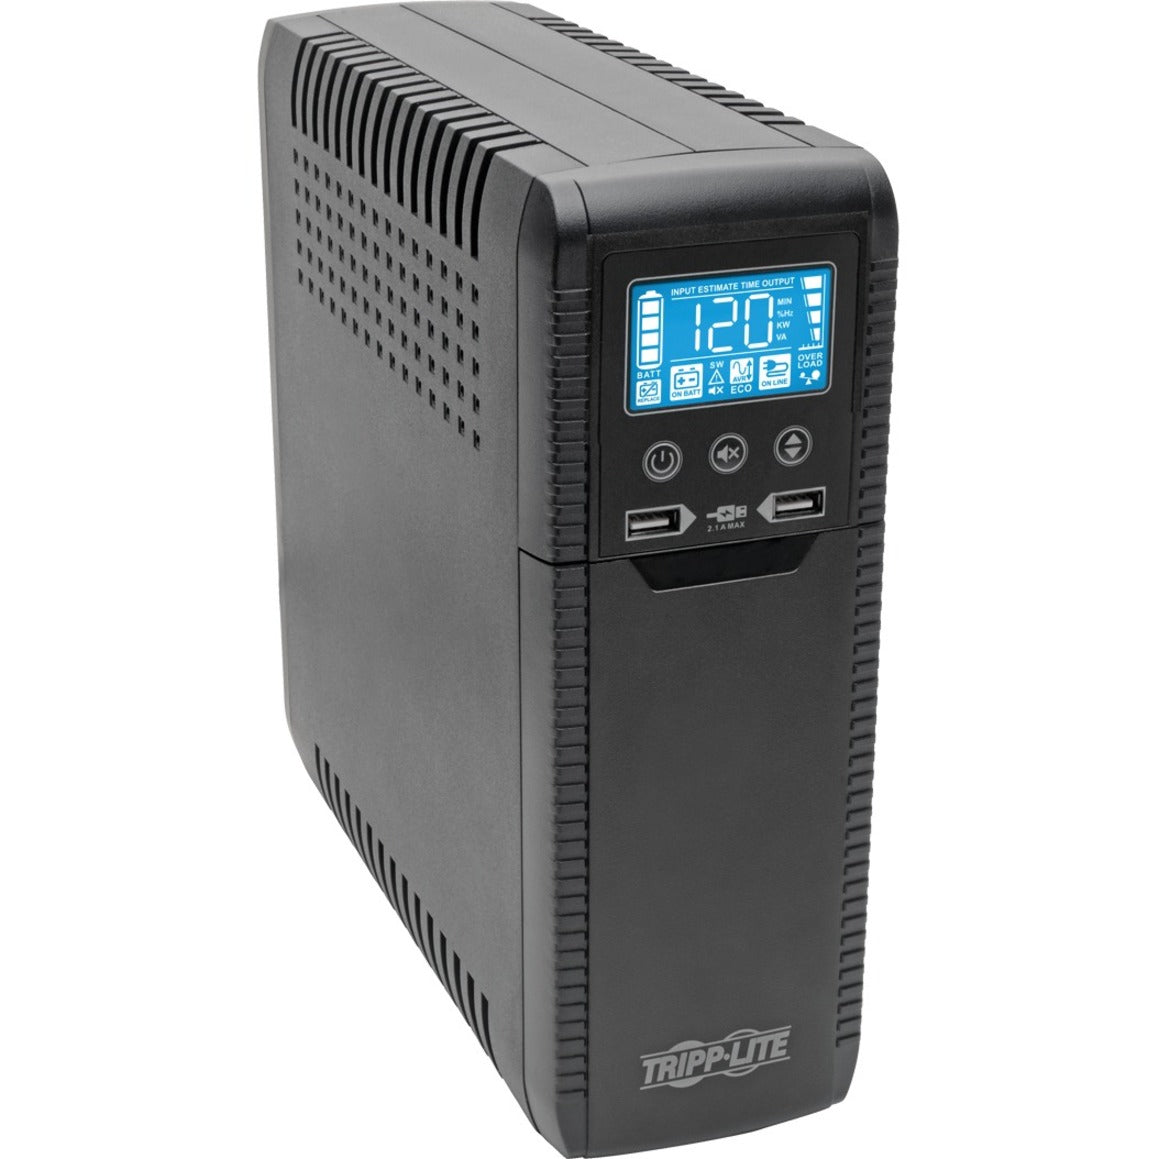 Tripp Lite ECO1000LCD LINE-INTERACTIVE UPS 8 OUTLETS, 1000VA Tower UPS